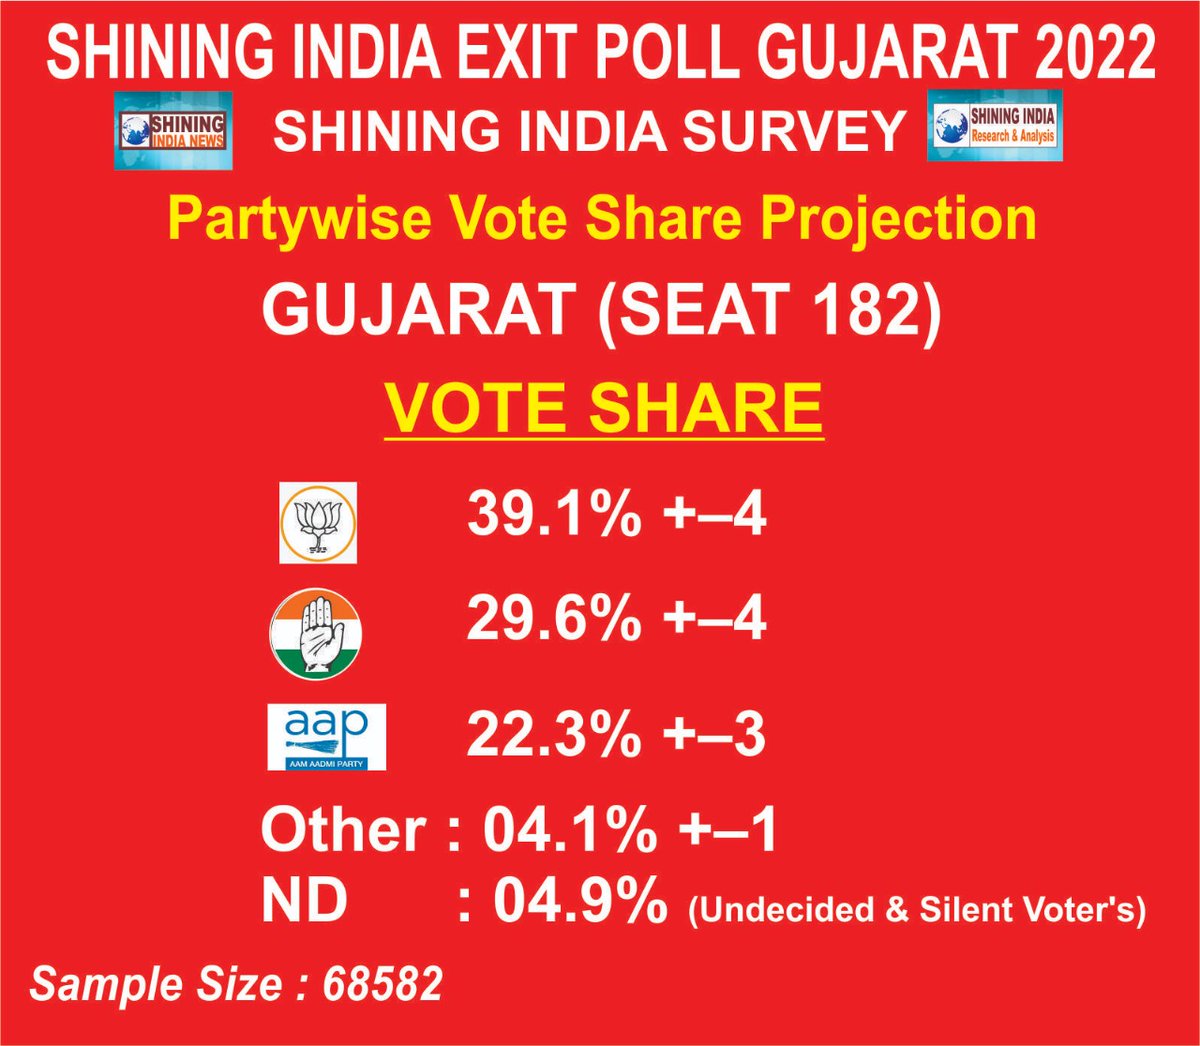 Shining India #ExitPoll #Gujarat 2022.
@AamAadmiParty  will surprise everyone in Gujarat with its vote share.  @ArvindKejriwal @BhagwantMann @raghav_chadha @msisodia
#GujaratExitPolls
#GujaratElections2022